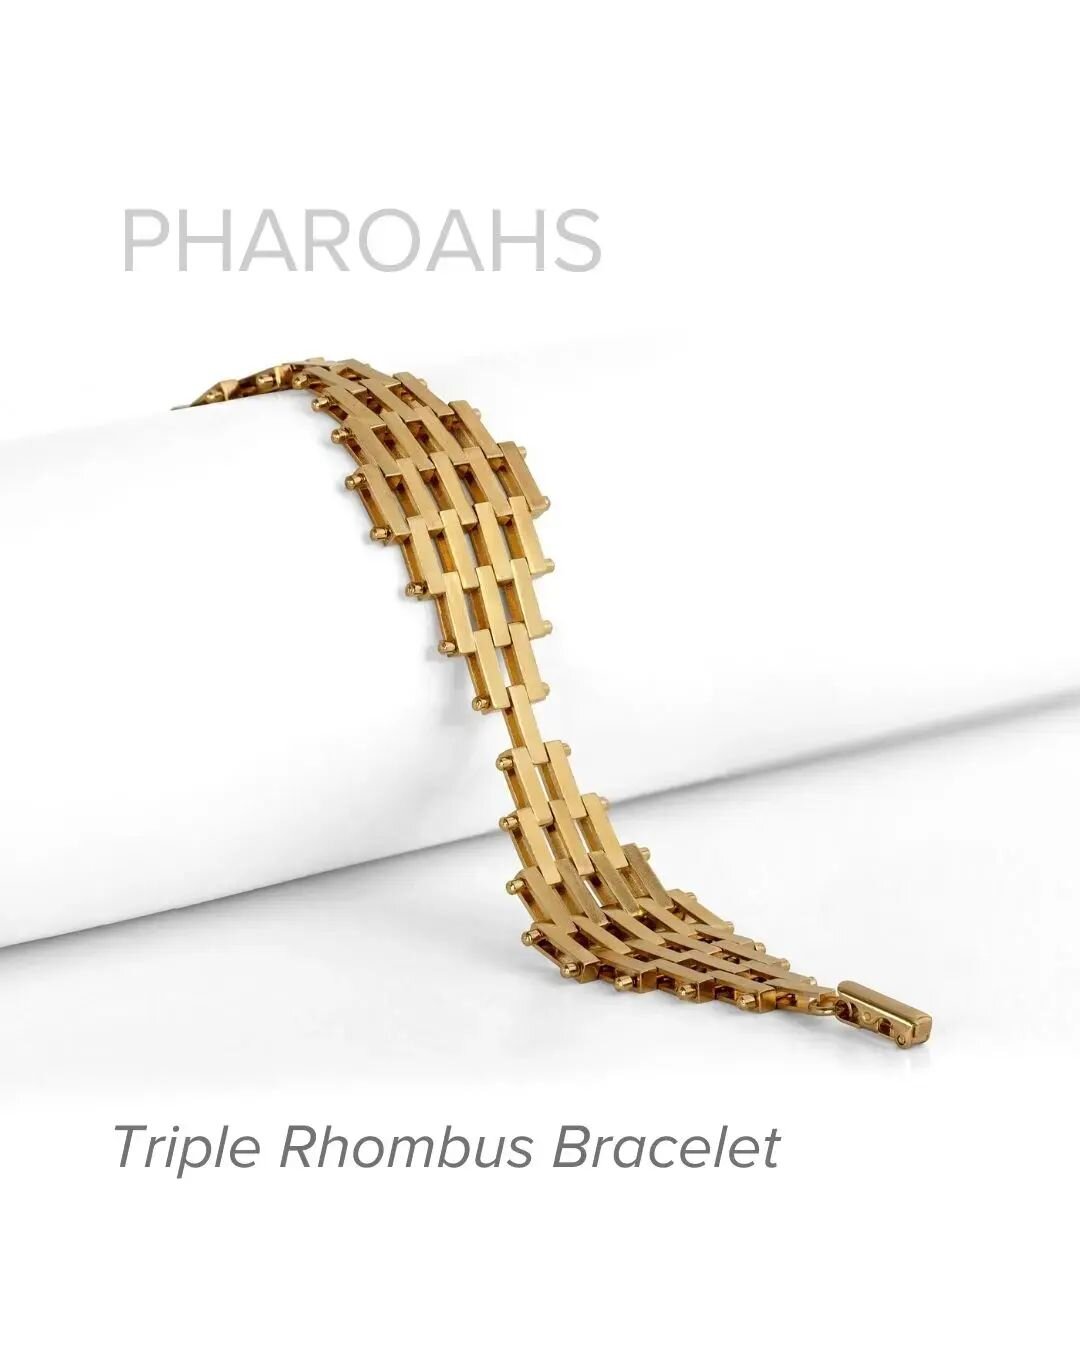 Pharoahs Triple Rhombus Bracelet ✨

A beautiful bracelet, so slinky to wear. Constructed from individual rectangular links that smoothly fit to the wrist.

Inspired by the symmetrical shapes of Ancient Egypt.

#caratonkin
#pharoahs 
#newartdeco
#tact